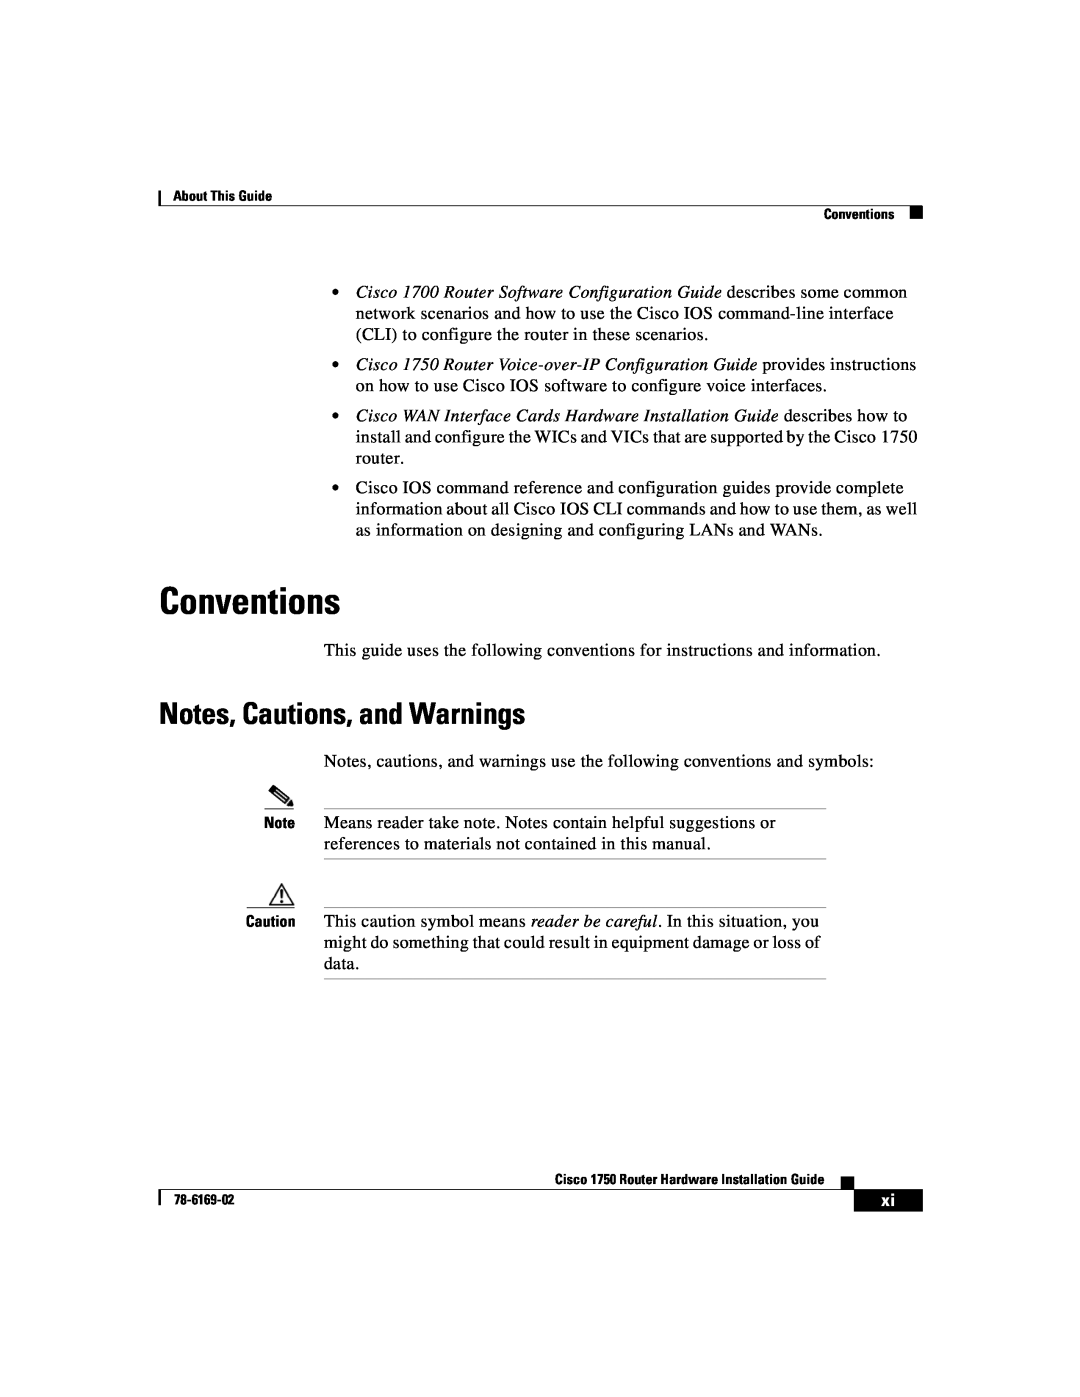 Cisco Systems CISCO1750 manual Conventions, Notes, Cautions, and Warnings 